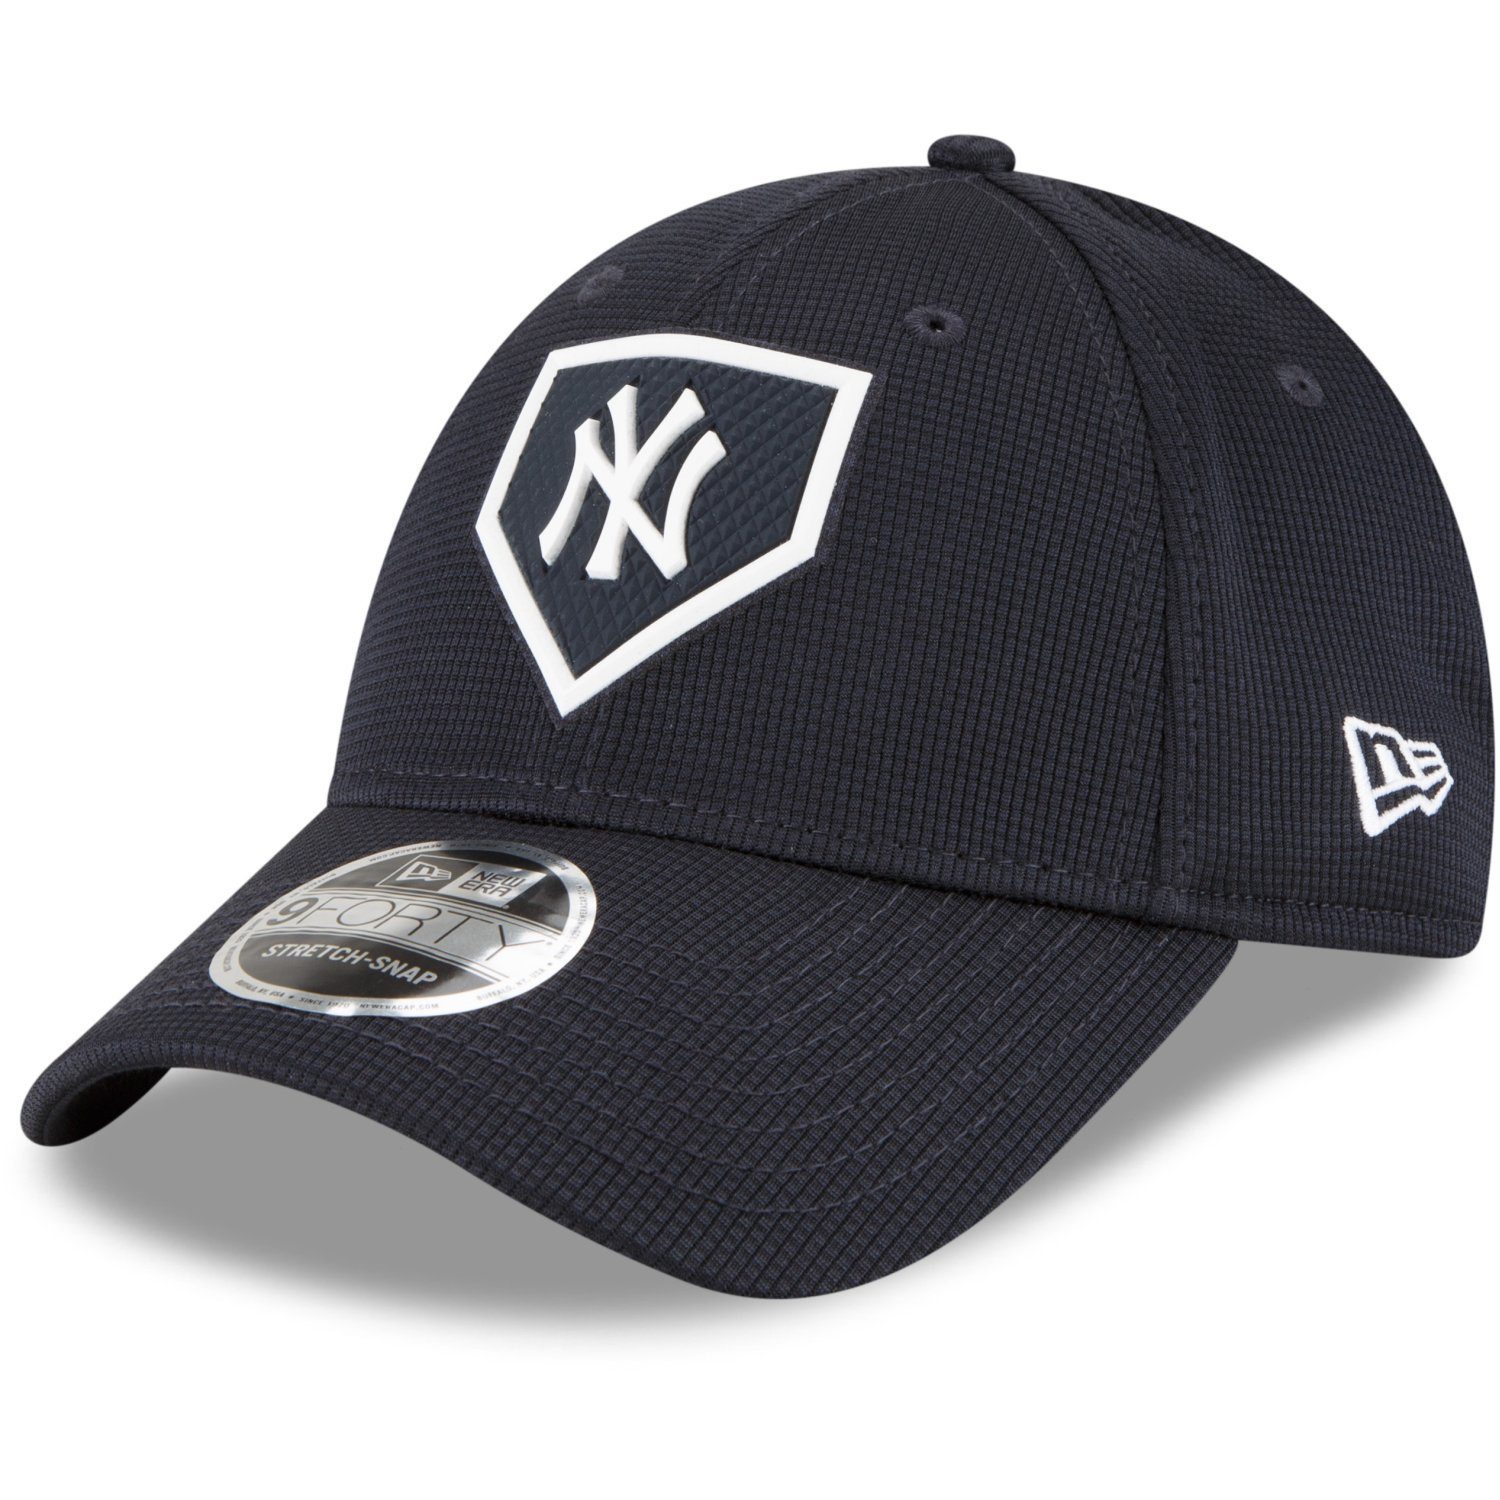 CLUBHOUSE StretchFit York Cap 2022 New Fitted Era New MLB 9FORTY Yankees